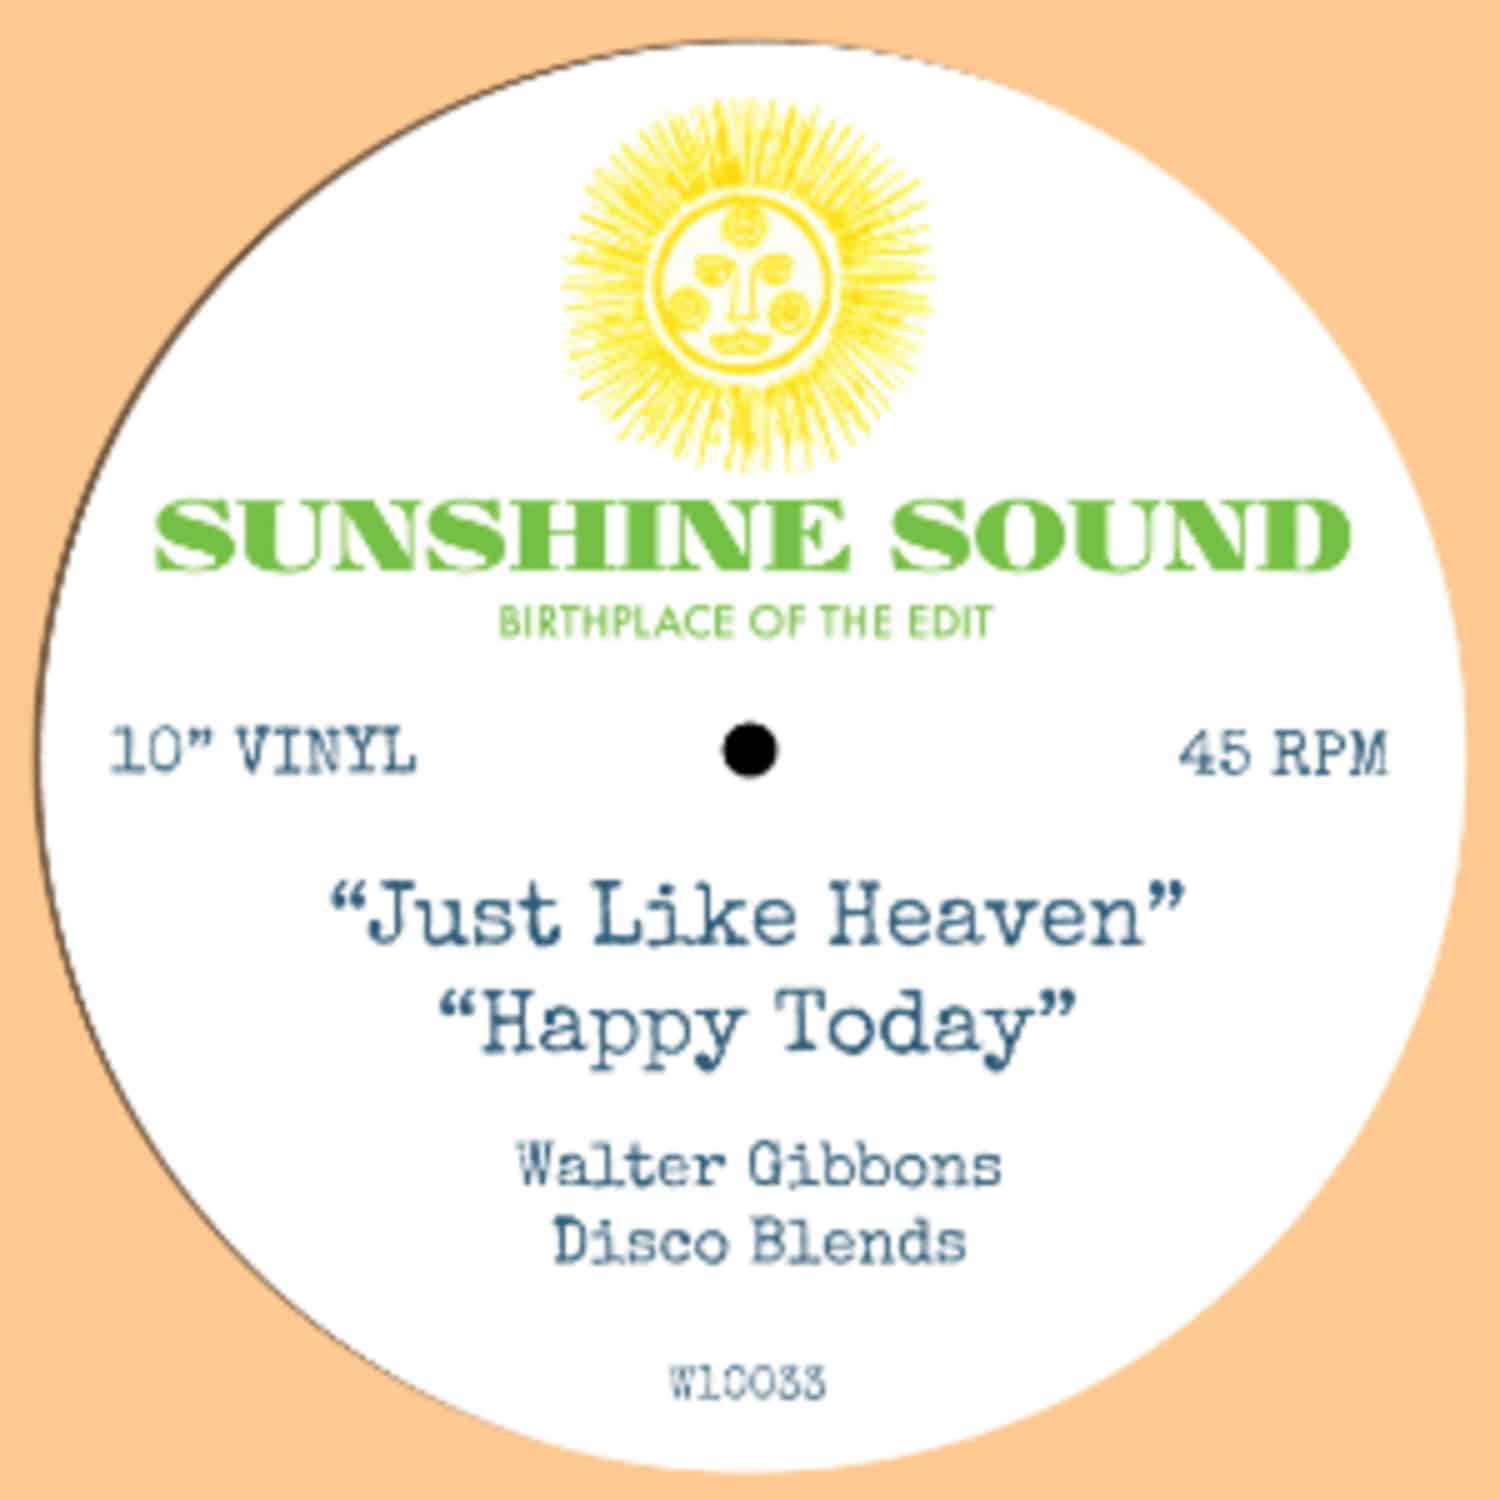 Walter Gibbons Disco Blends - JUST LIKE HEAVEN / HAPPY TODAY 